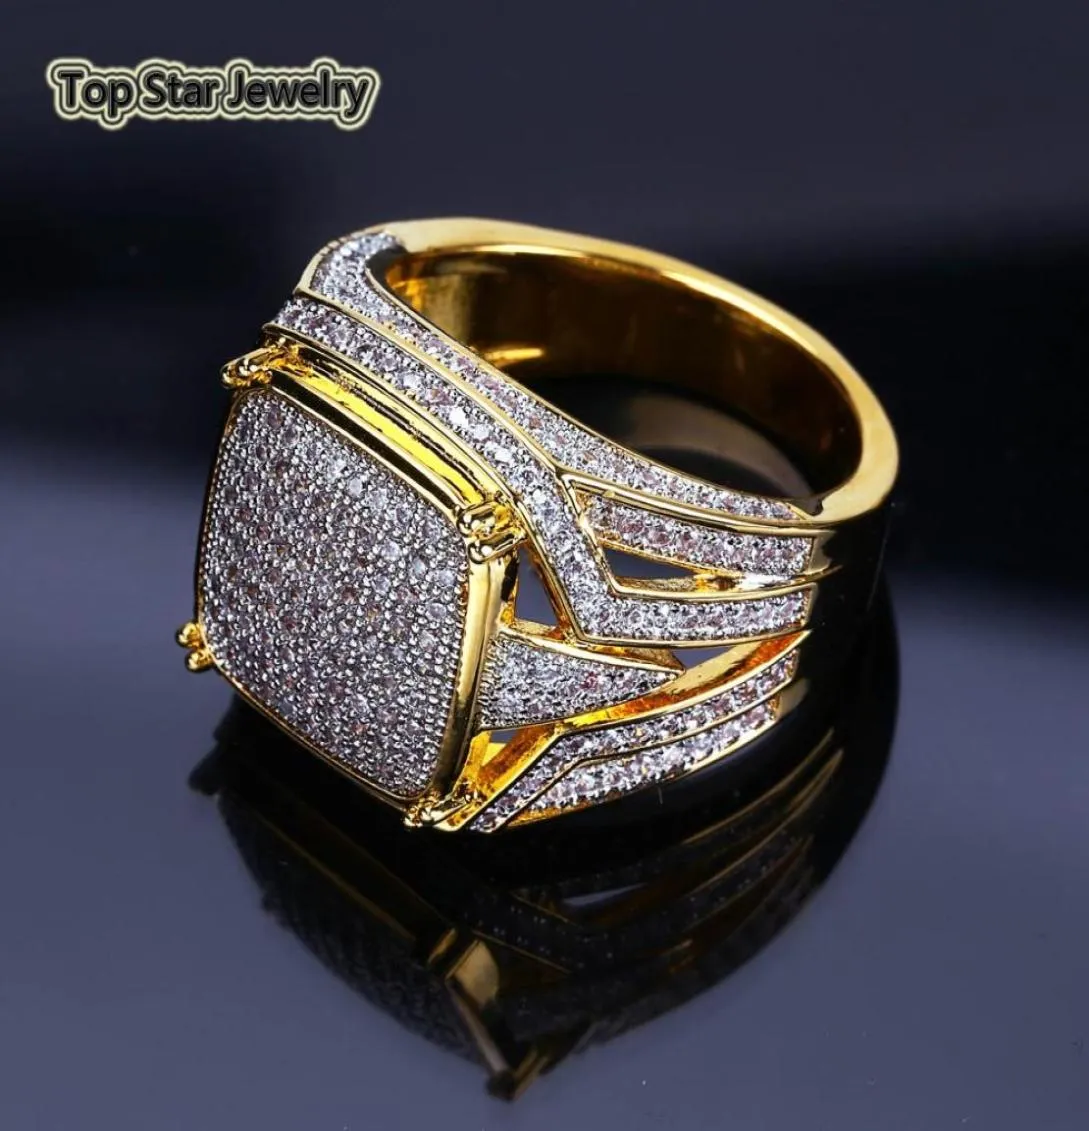 Vintage Copper Ring Shiny Micro Cubic Zirconia Real Gold Plated Rings Punk Finger Accessories For Men Hip Hop Rapper Jewelry Gift 8720252